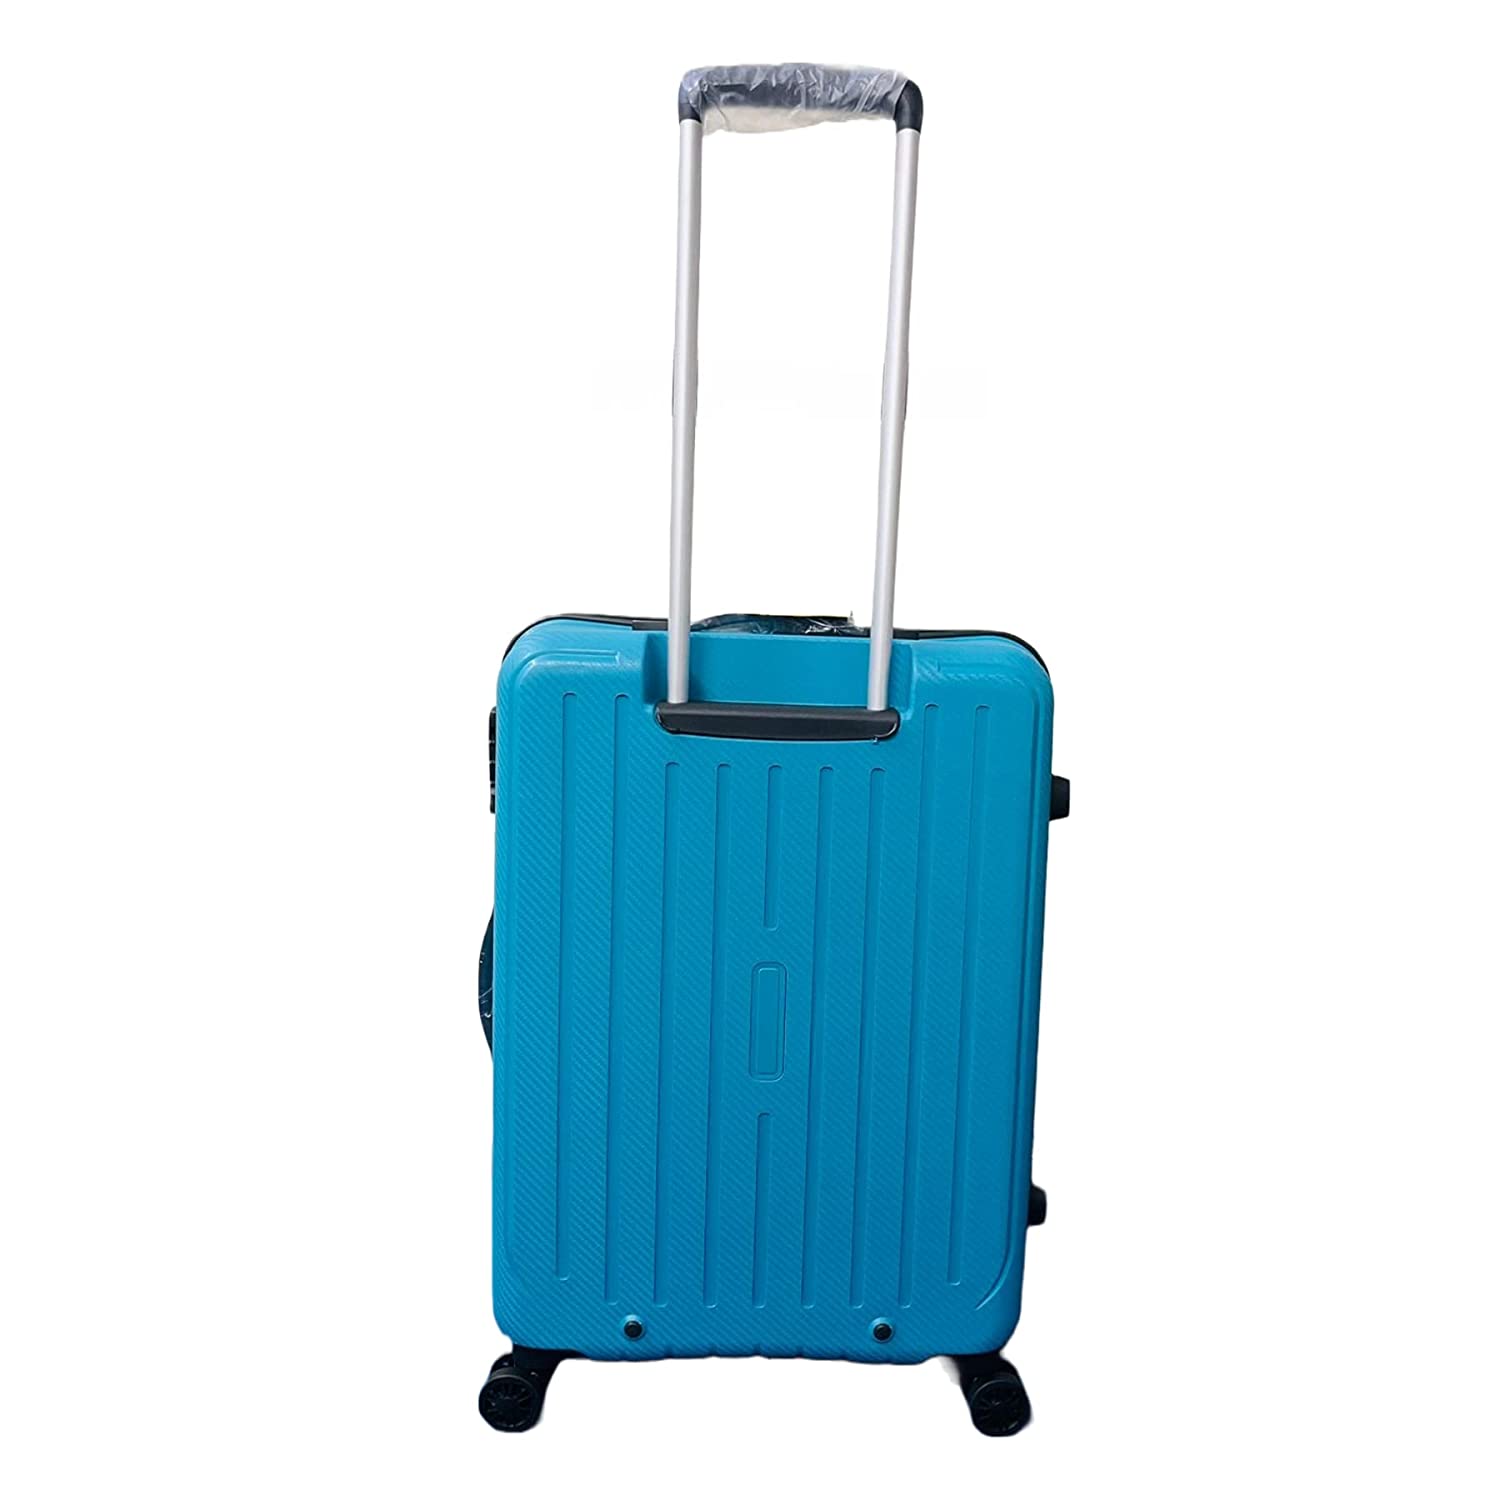 DE Shopping Trolley Bag for Vegetable Market,Super  Market/Mall-Flodable-Quality Luggage bag and Wheels. MAKE IN INDIA Trolley  - Trolley - Flipkart.com